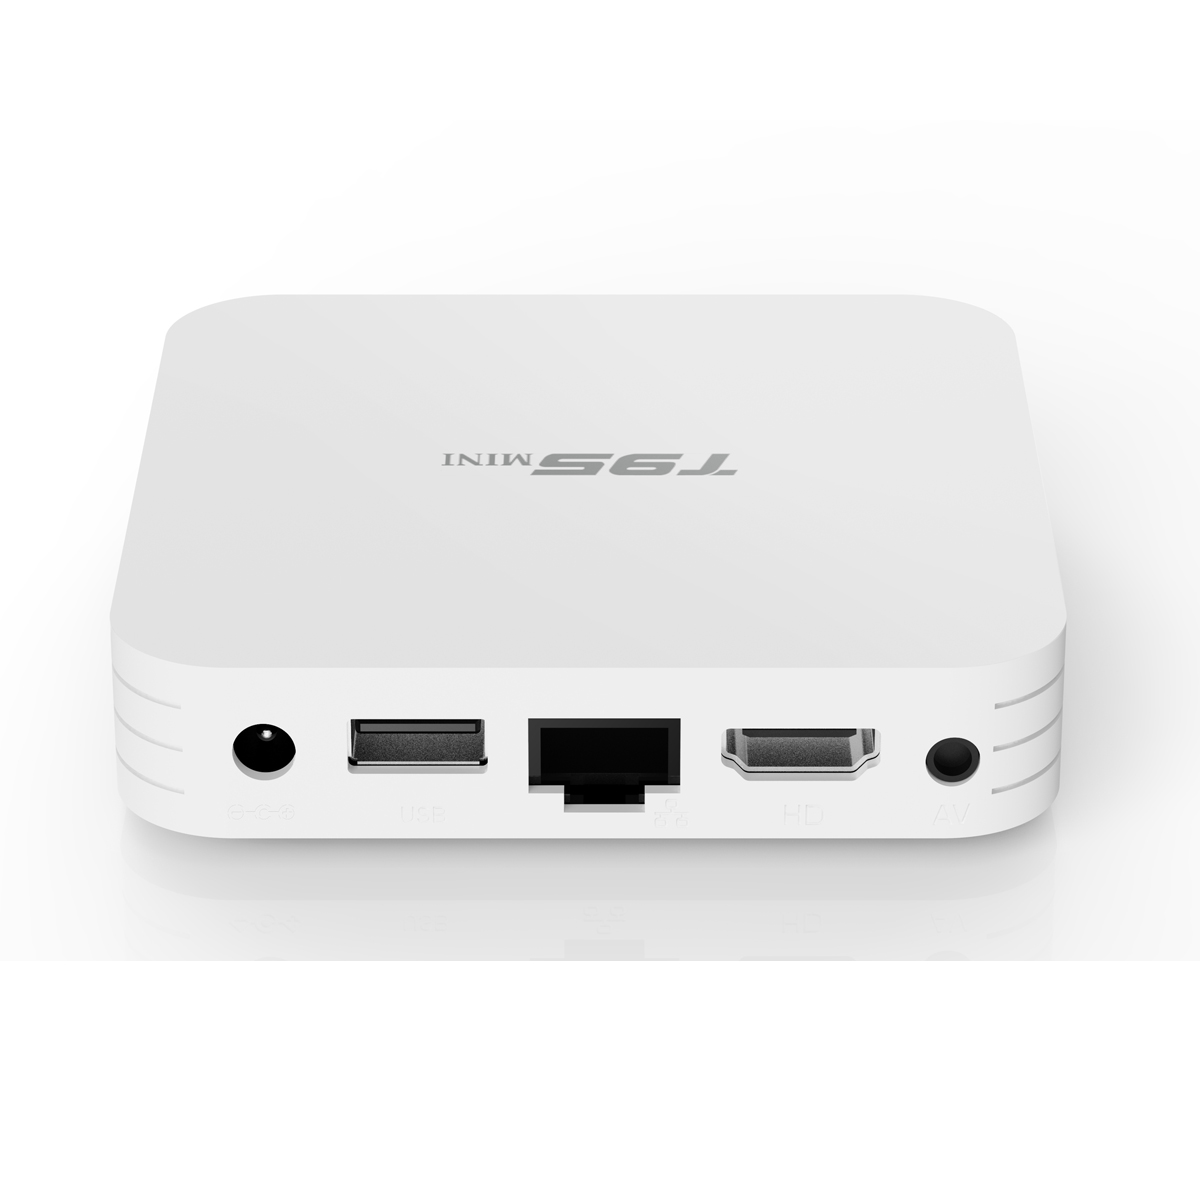 Find T95 MINI Allwinner H313 Quad Core 2GB 4GB RAM 16GB 64GB ROM 5G Wifi Android 10 0 4K HDR TV Box H 265 HEVC 4K 60fps VP9 for Sale on Gipsybee.com with cryptocurrencies